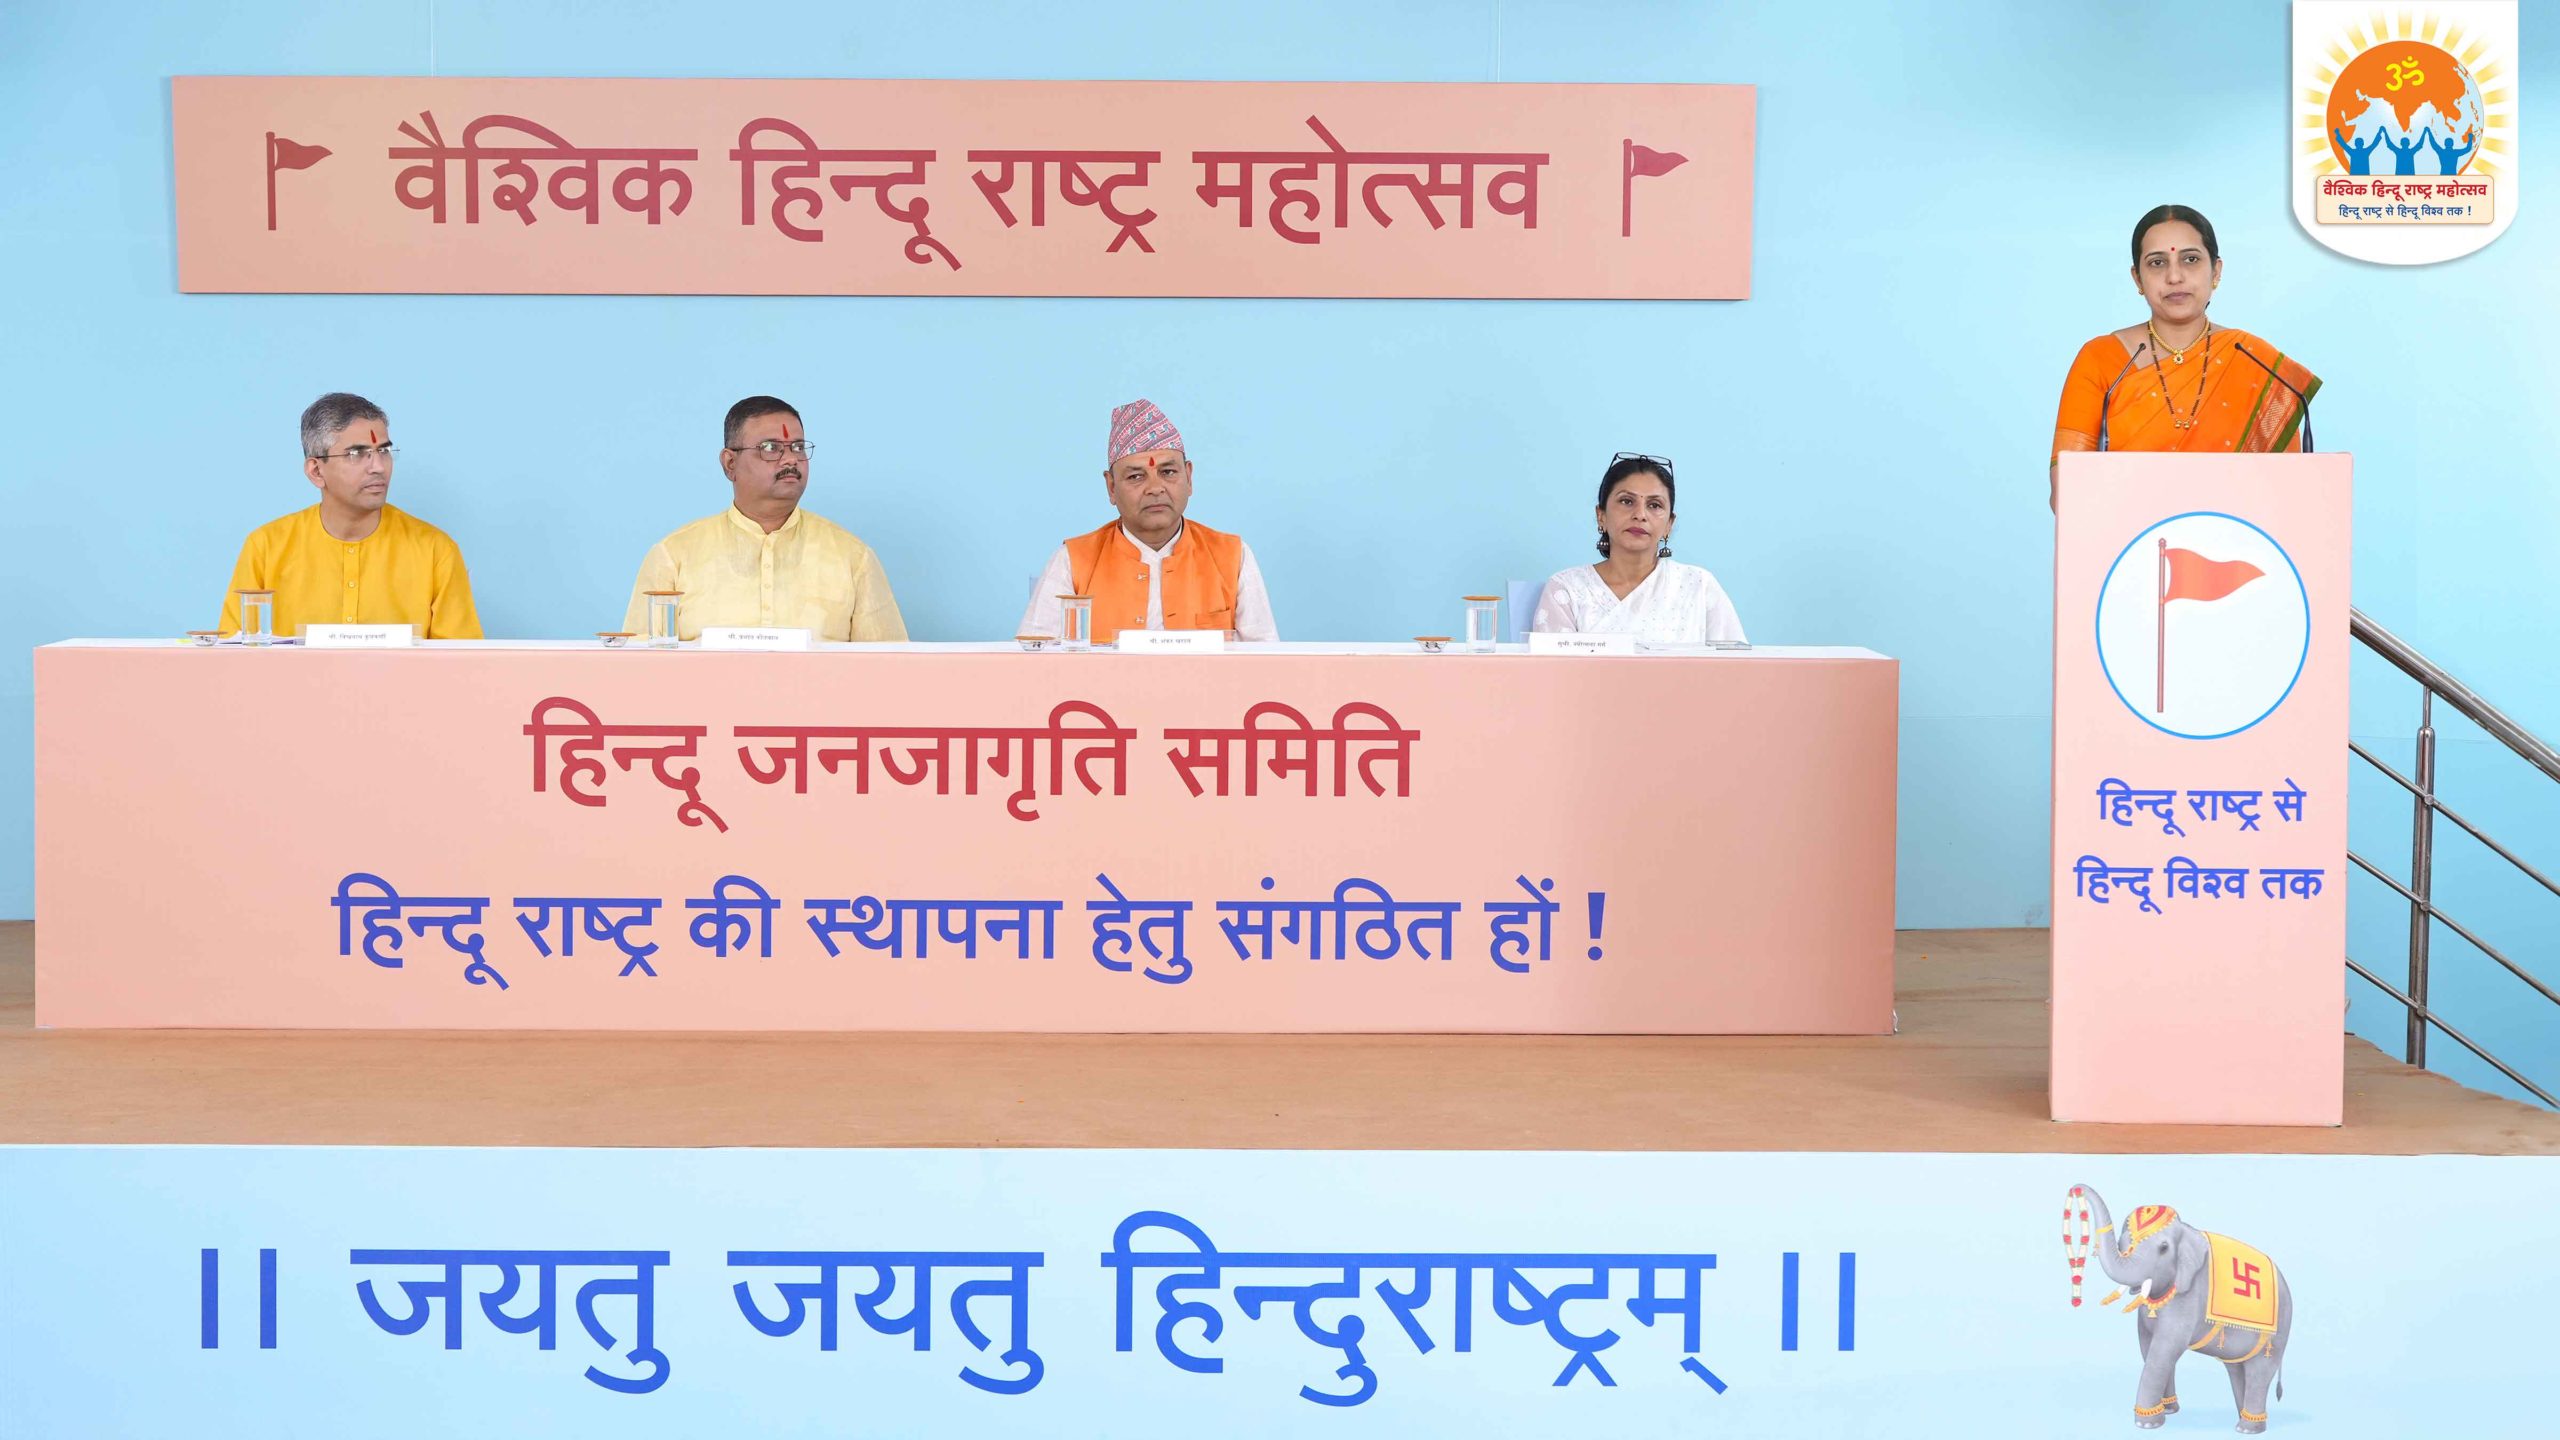 Devout Hindus participating in a session on - 'The importance of Hindu Unity for establishing the 'Hindu Rashtra', and for the protection of the Nation